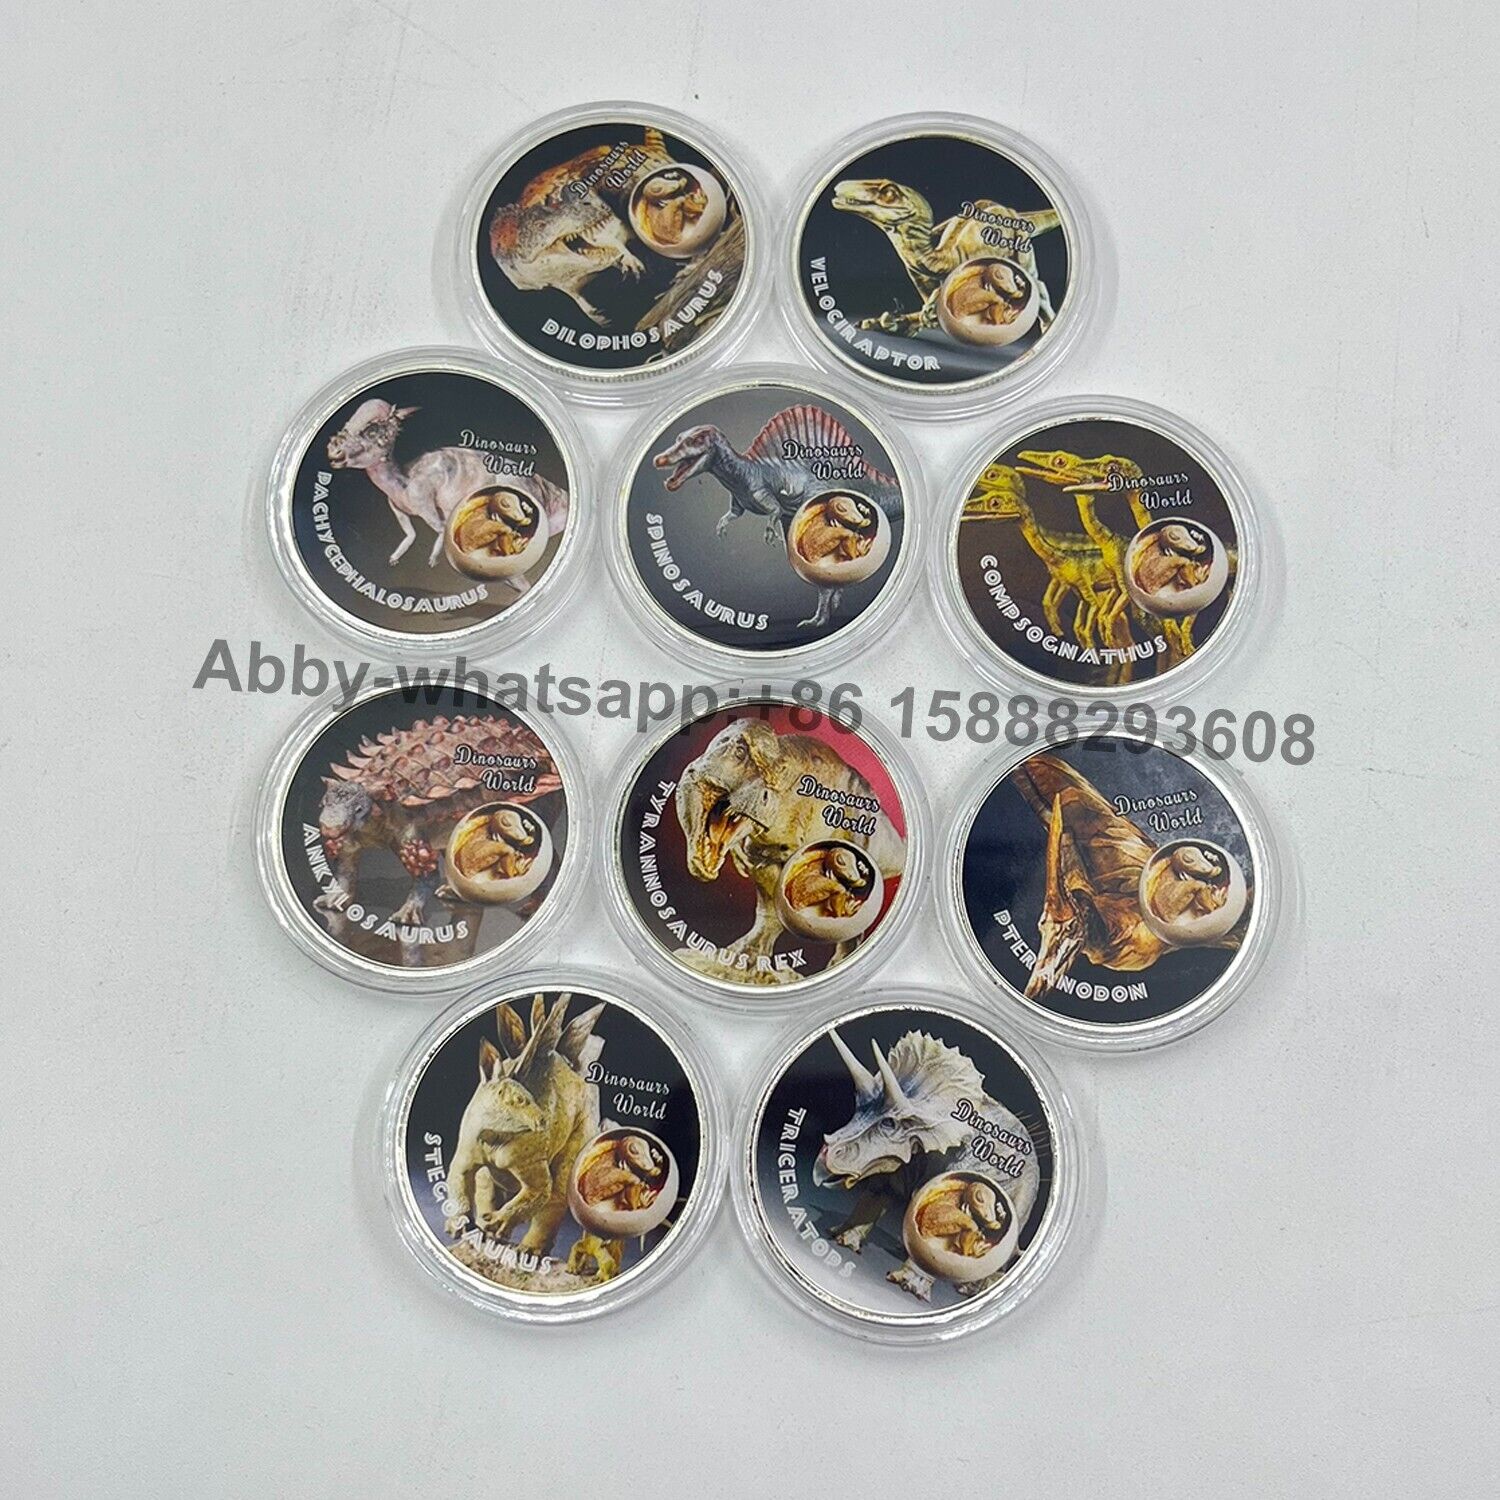 10pcs Dinosaur Silver Plated Coin Jurassic World Collectibles Challenge coin box